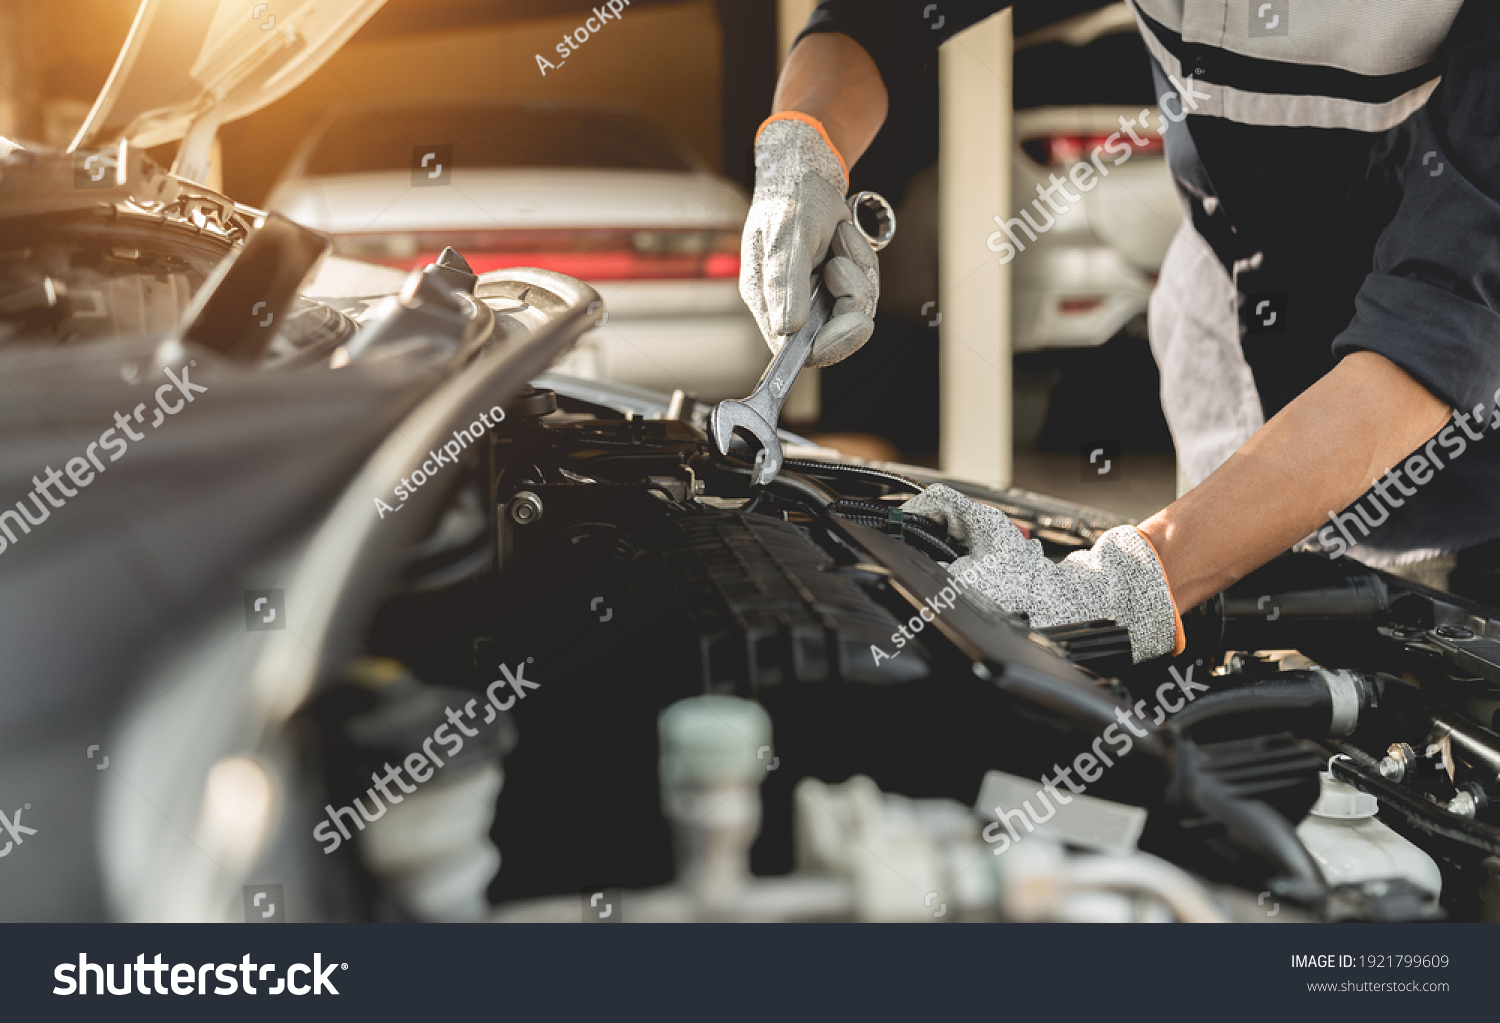 Automobile mechanic repairman hands repairing a car engine automotive workshop with a wrench, car service and maintenance,Repair service. #1921799609